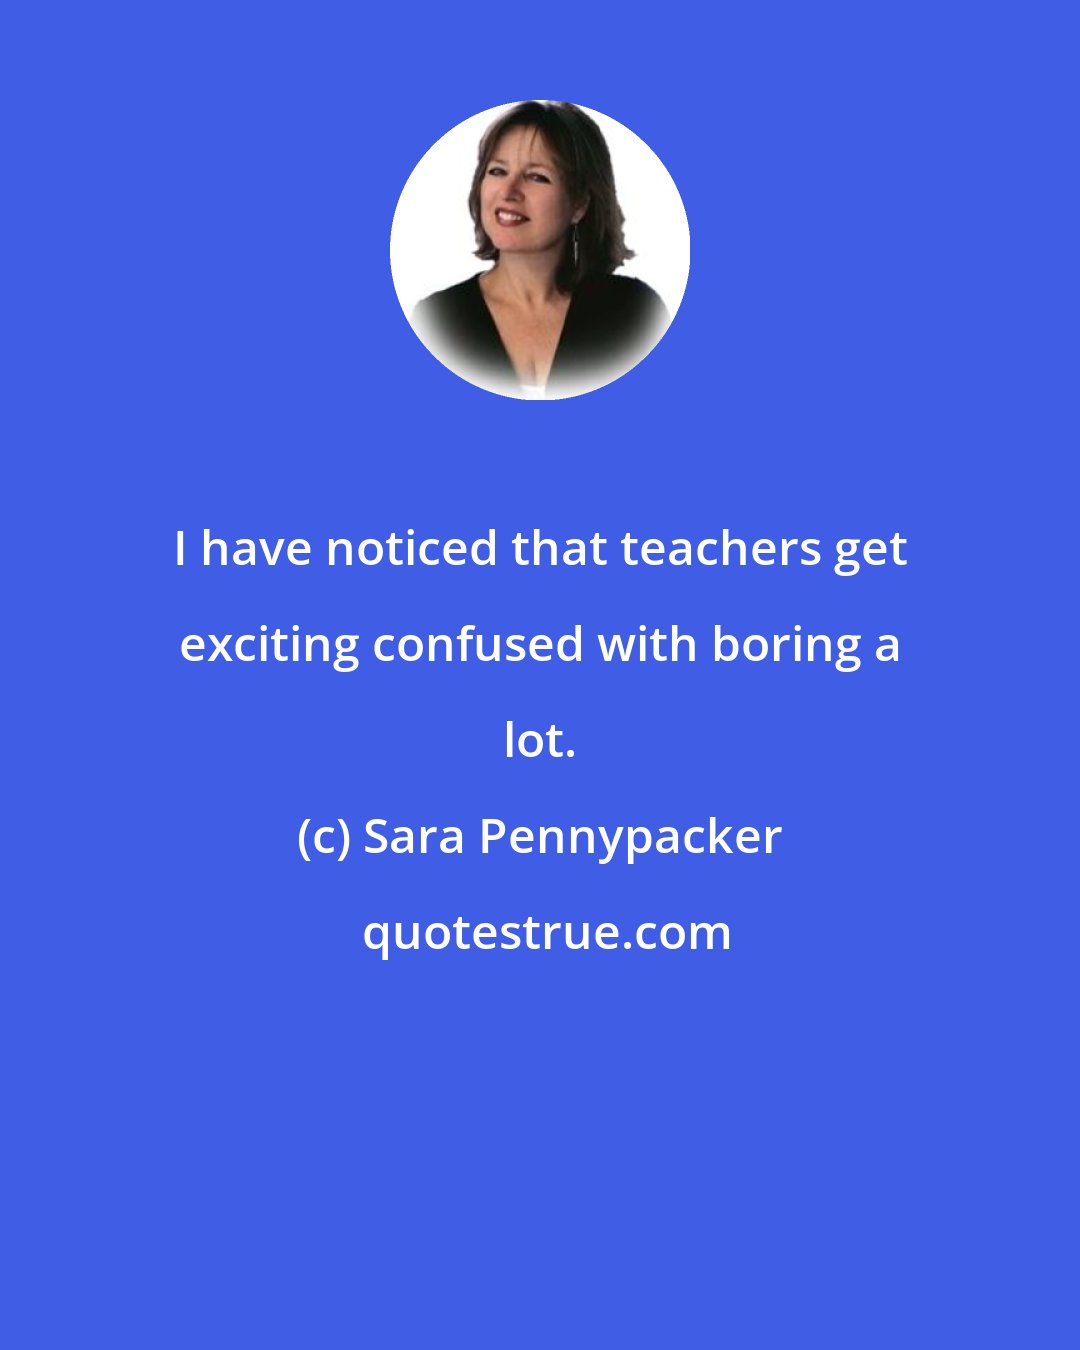 Sara Pennypacker: I have noticed that teachers get exciting confused with boring a lot.